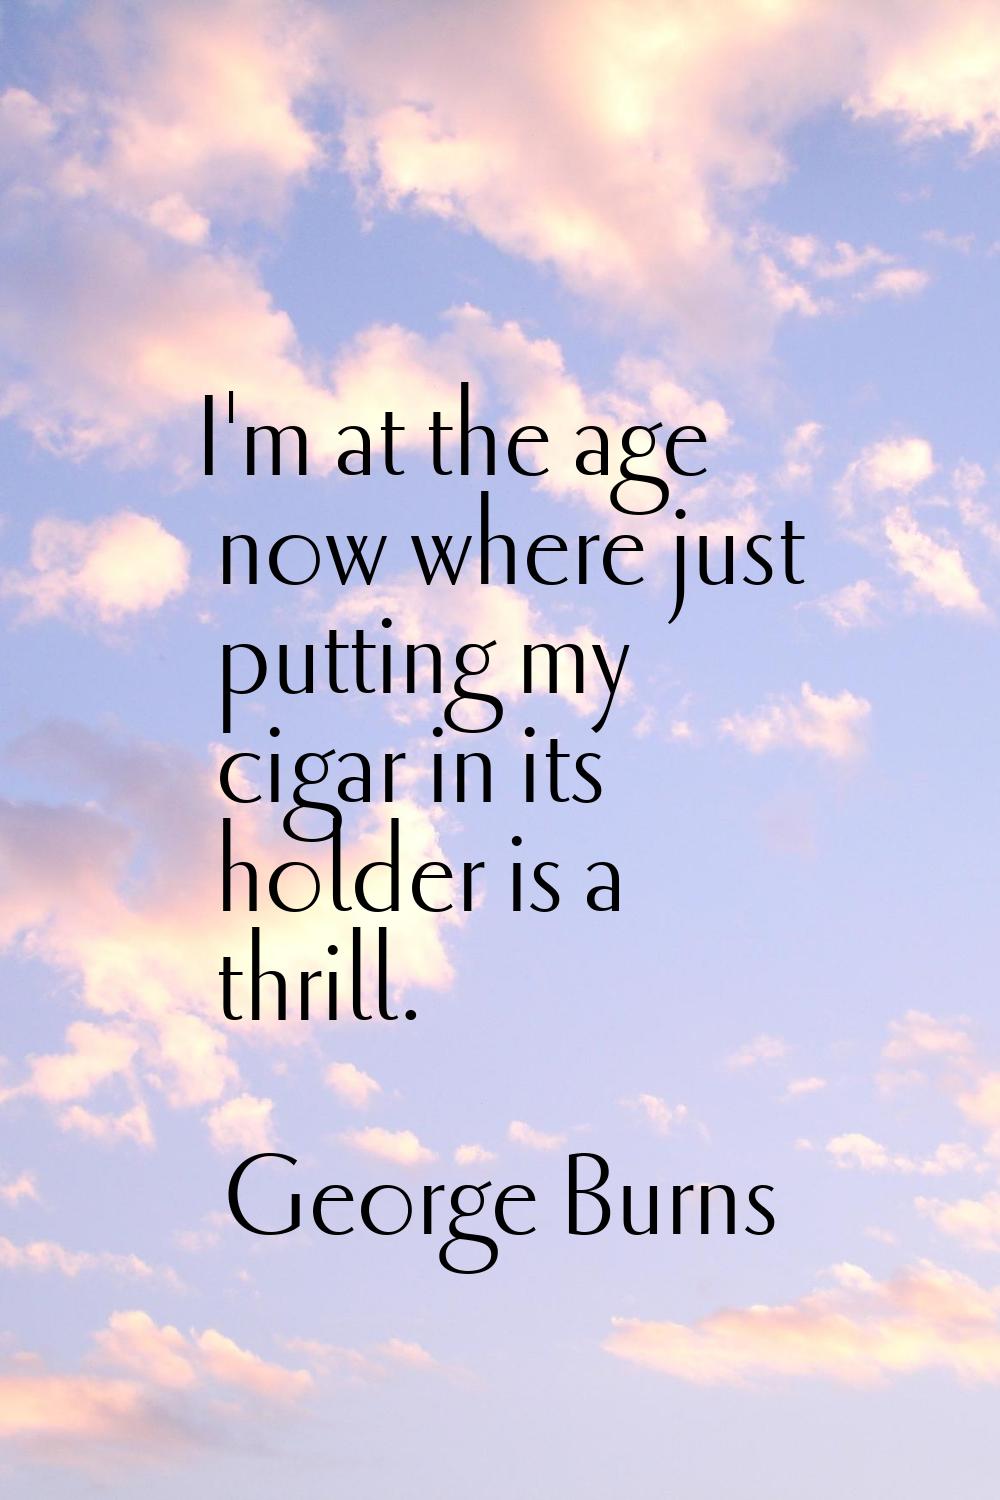 I'm at the age now where just putting my cigar in its holder is a thrill.